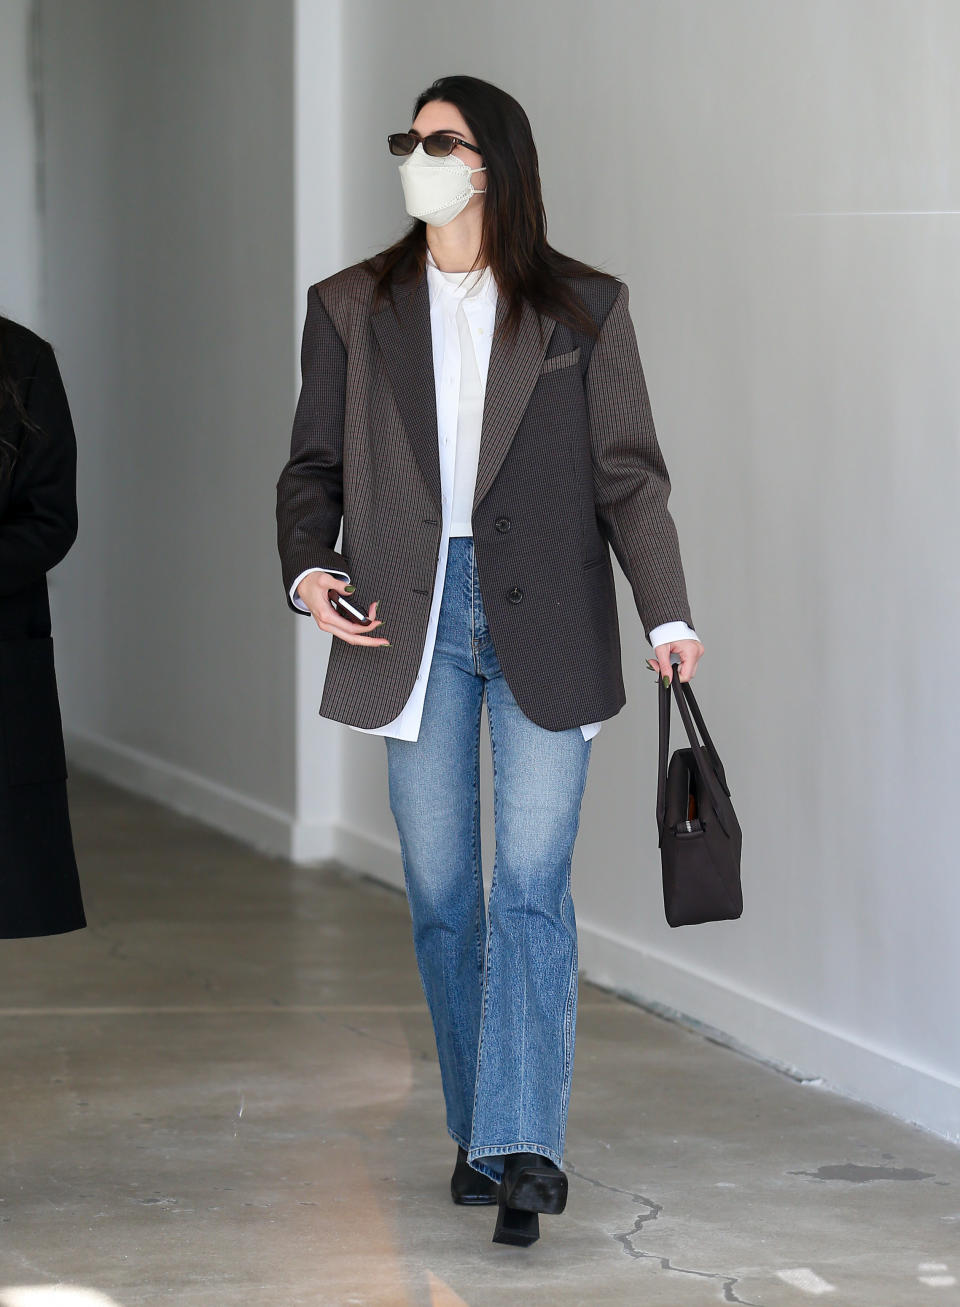 kendall jenner in brown blazer and blue jeans and white shirt